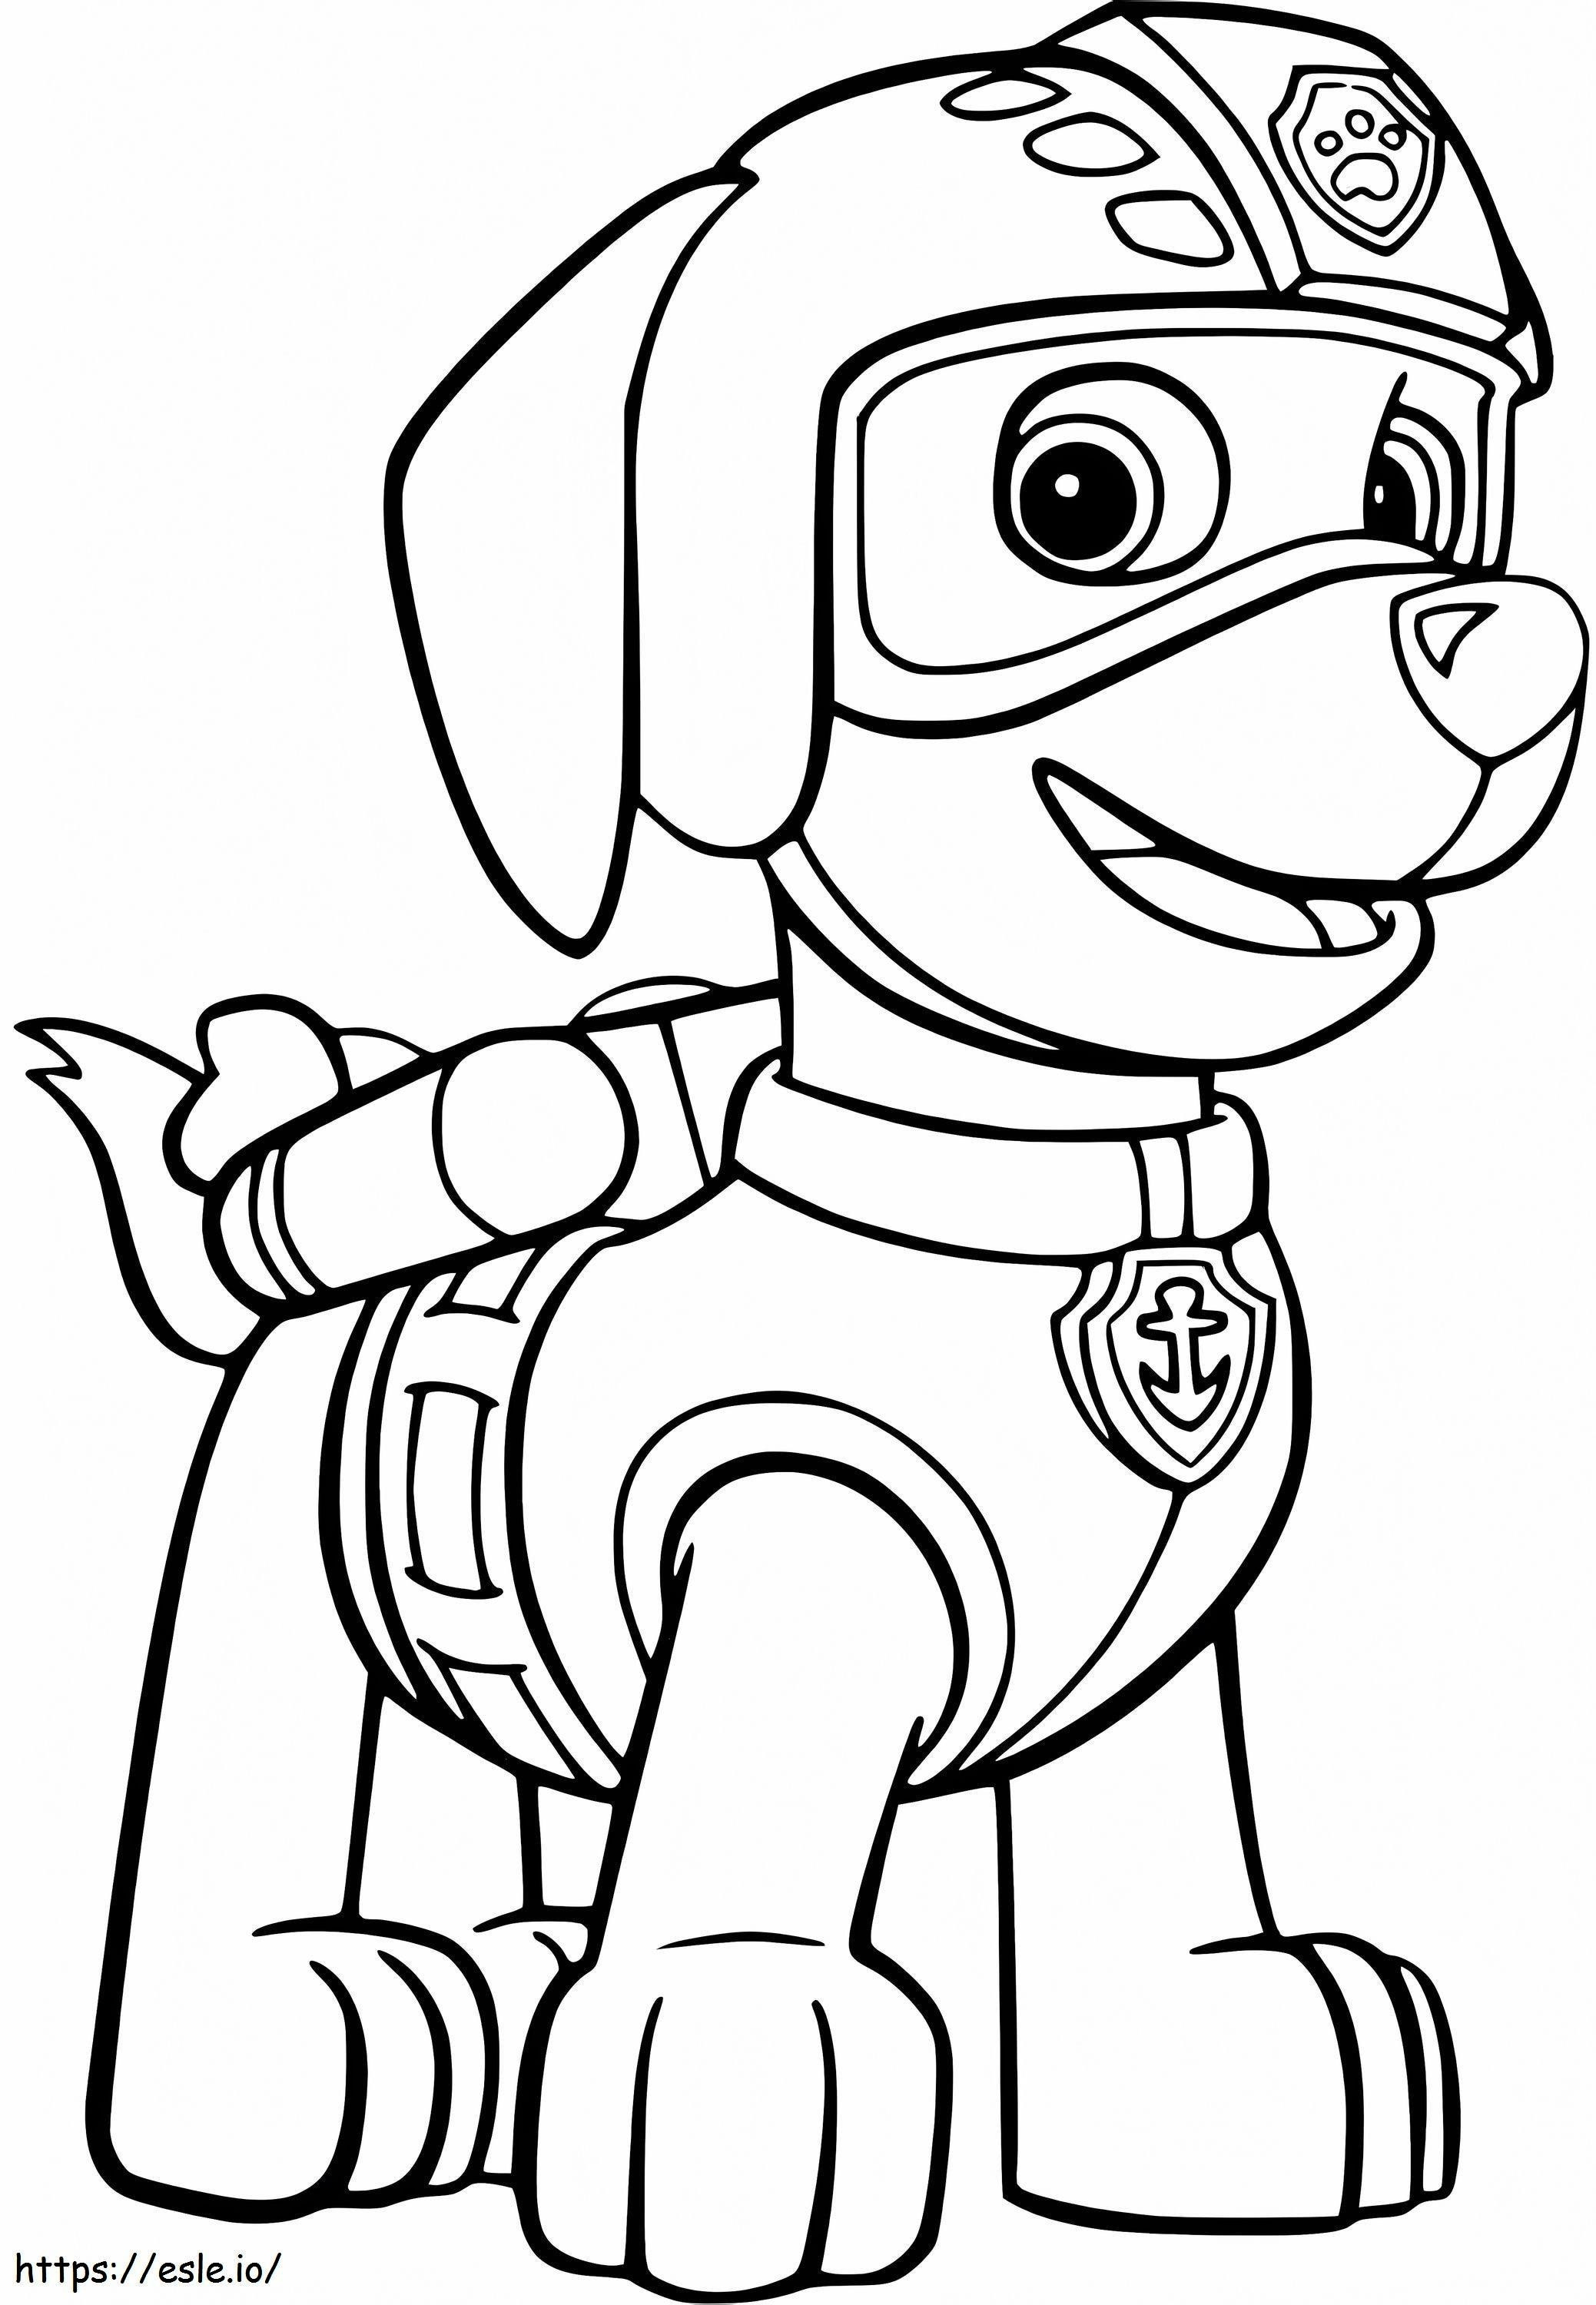 Patrol Canine Zuma Running coloring page